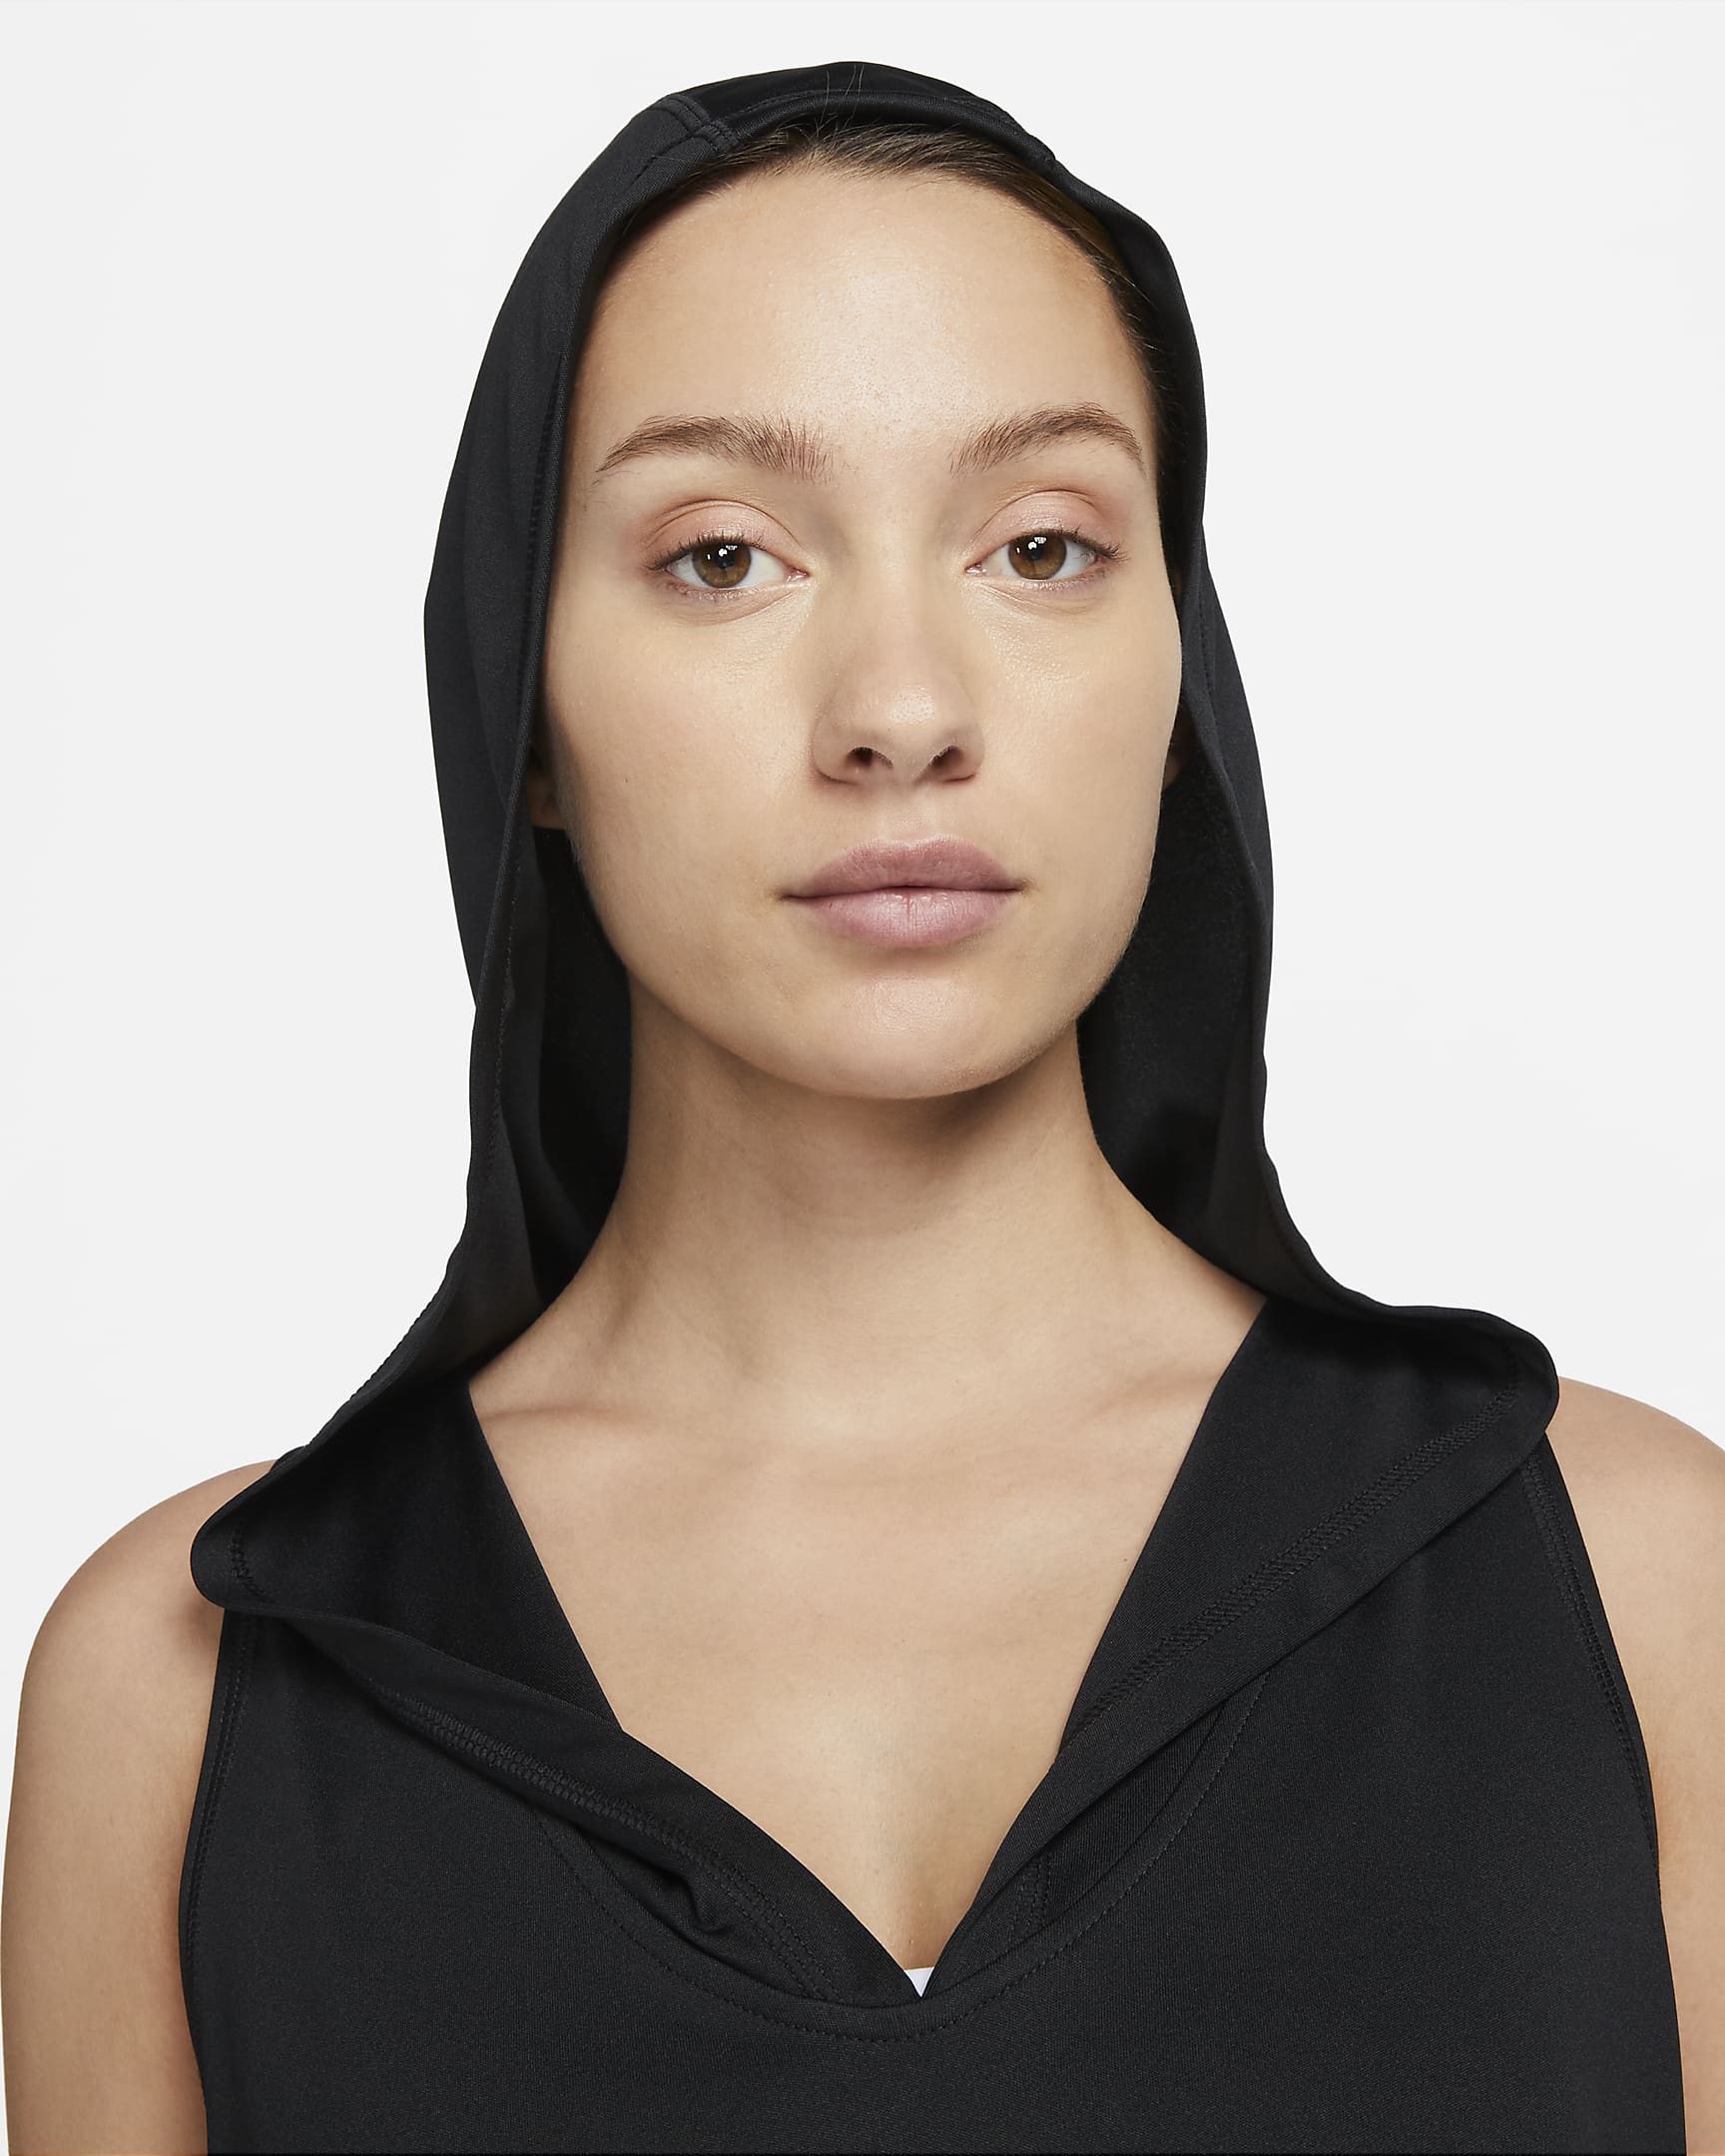 Nike Solid Cover-Up Women's Hooded Dress. Nike.com